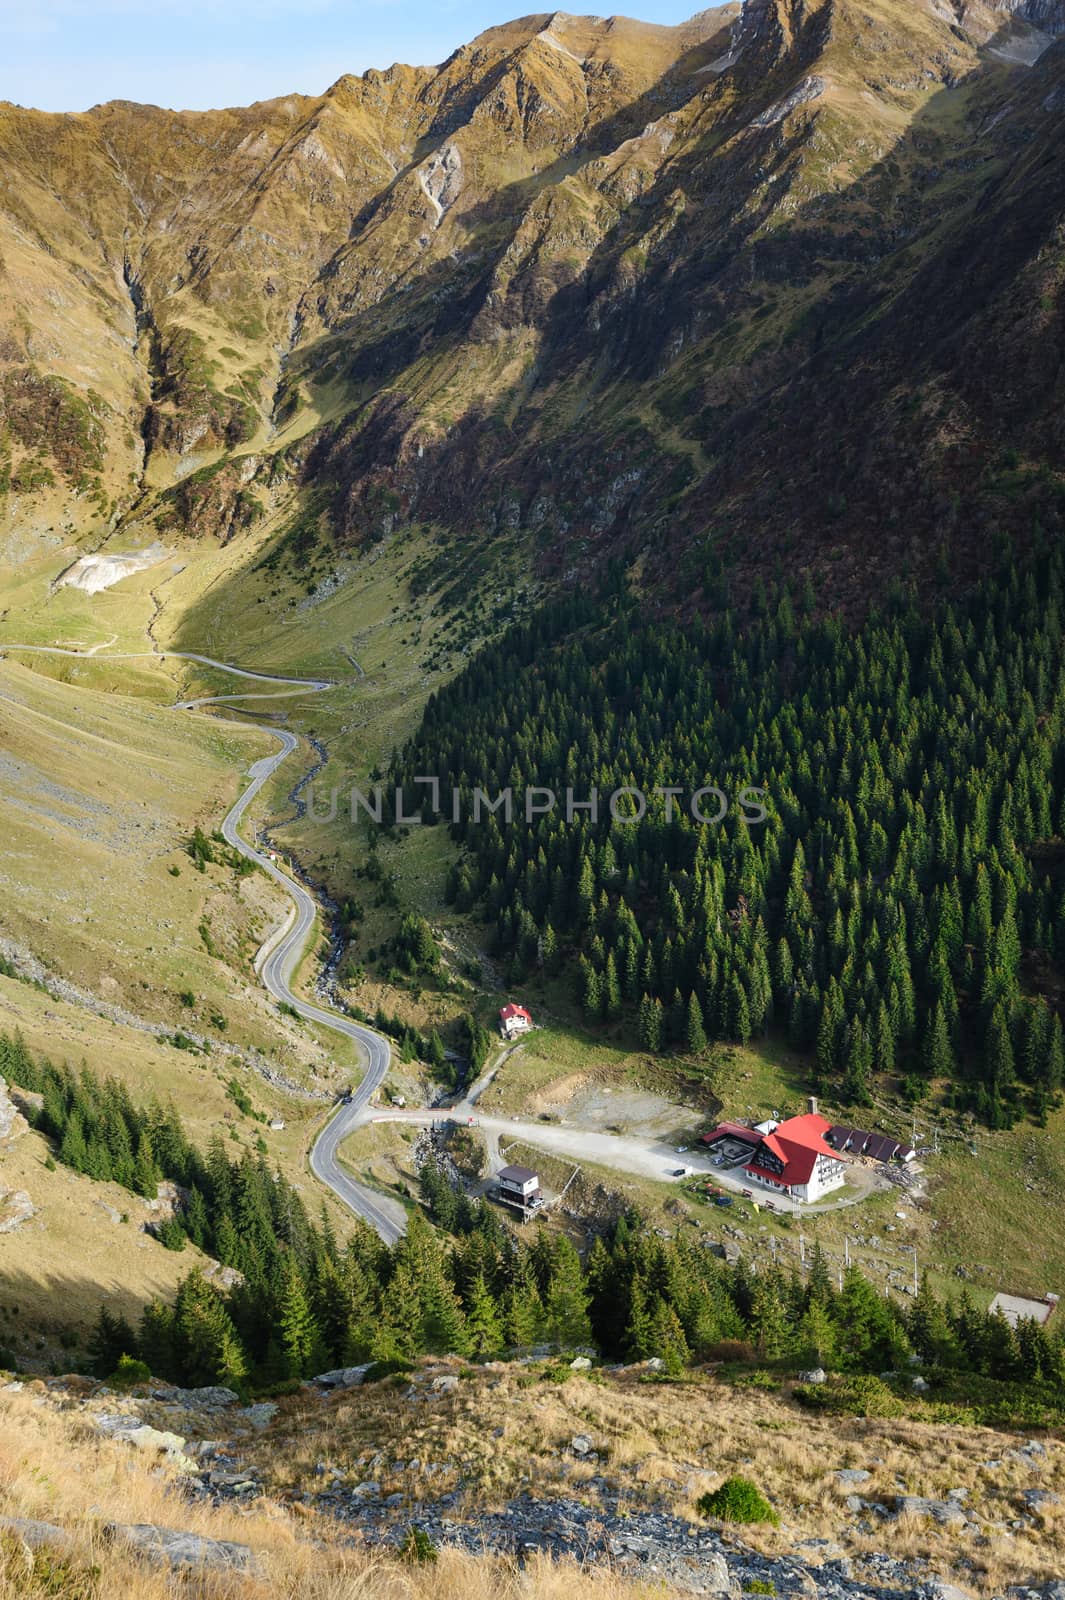 View from Transfagarasan road down to valley, Romania by starush